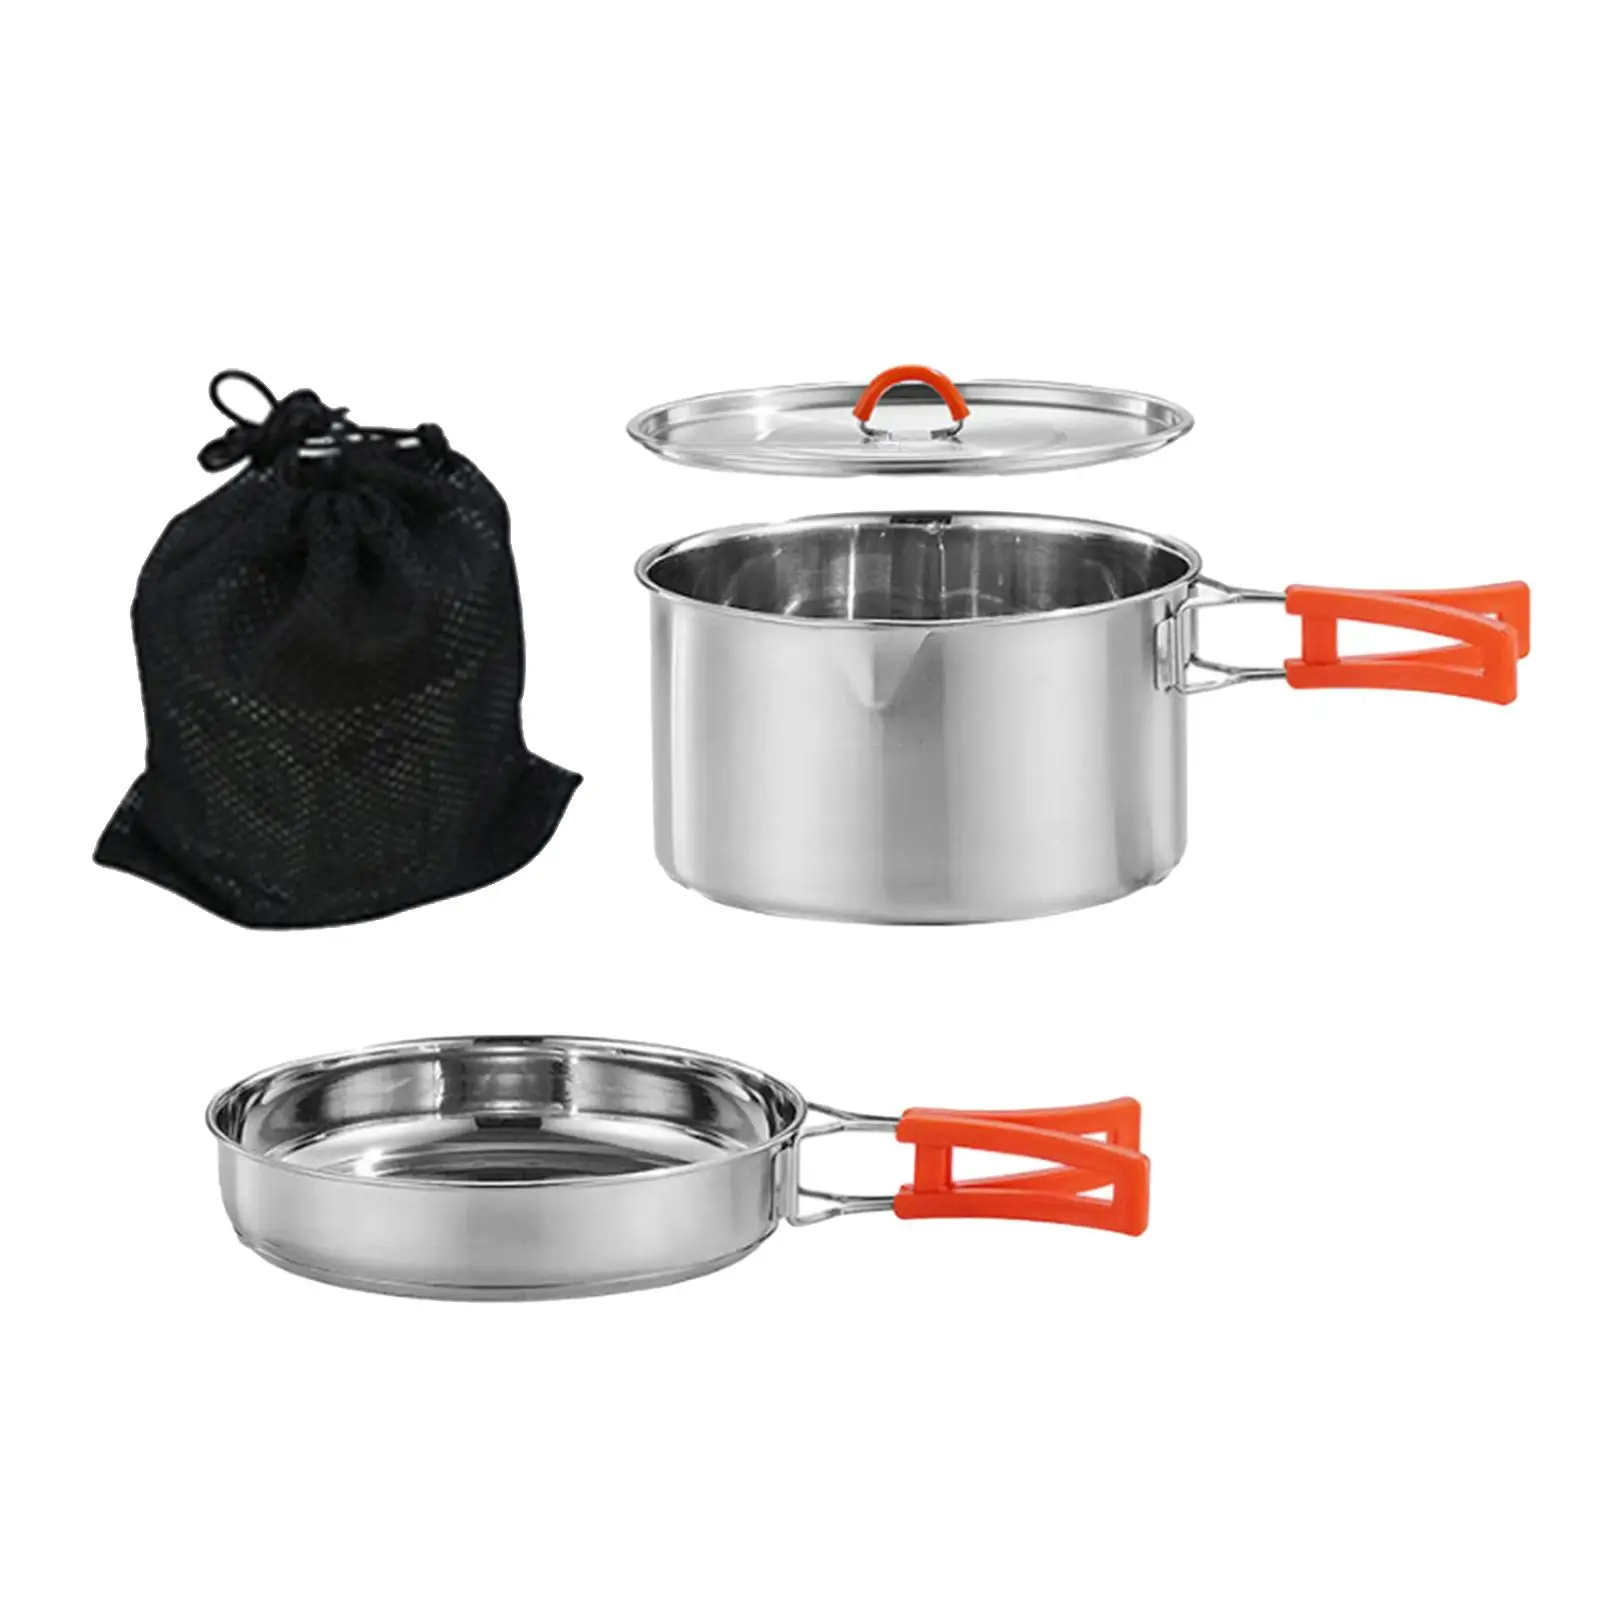 Camping Cookware with Mesh Carry Bag, Easy to Clean Lightweight Camping Pot Pan Camping Cooking Set for Camp Hiking Picnic